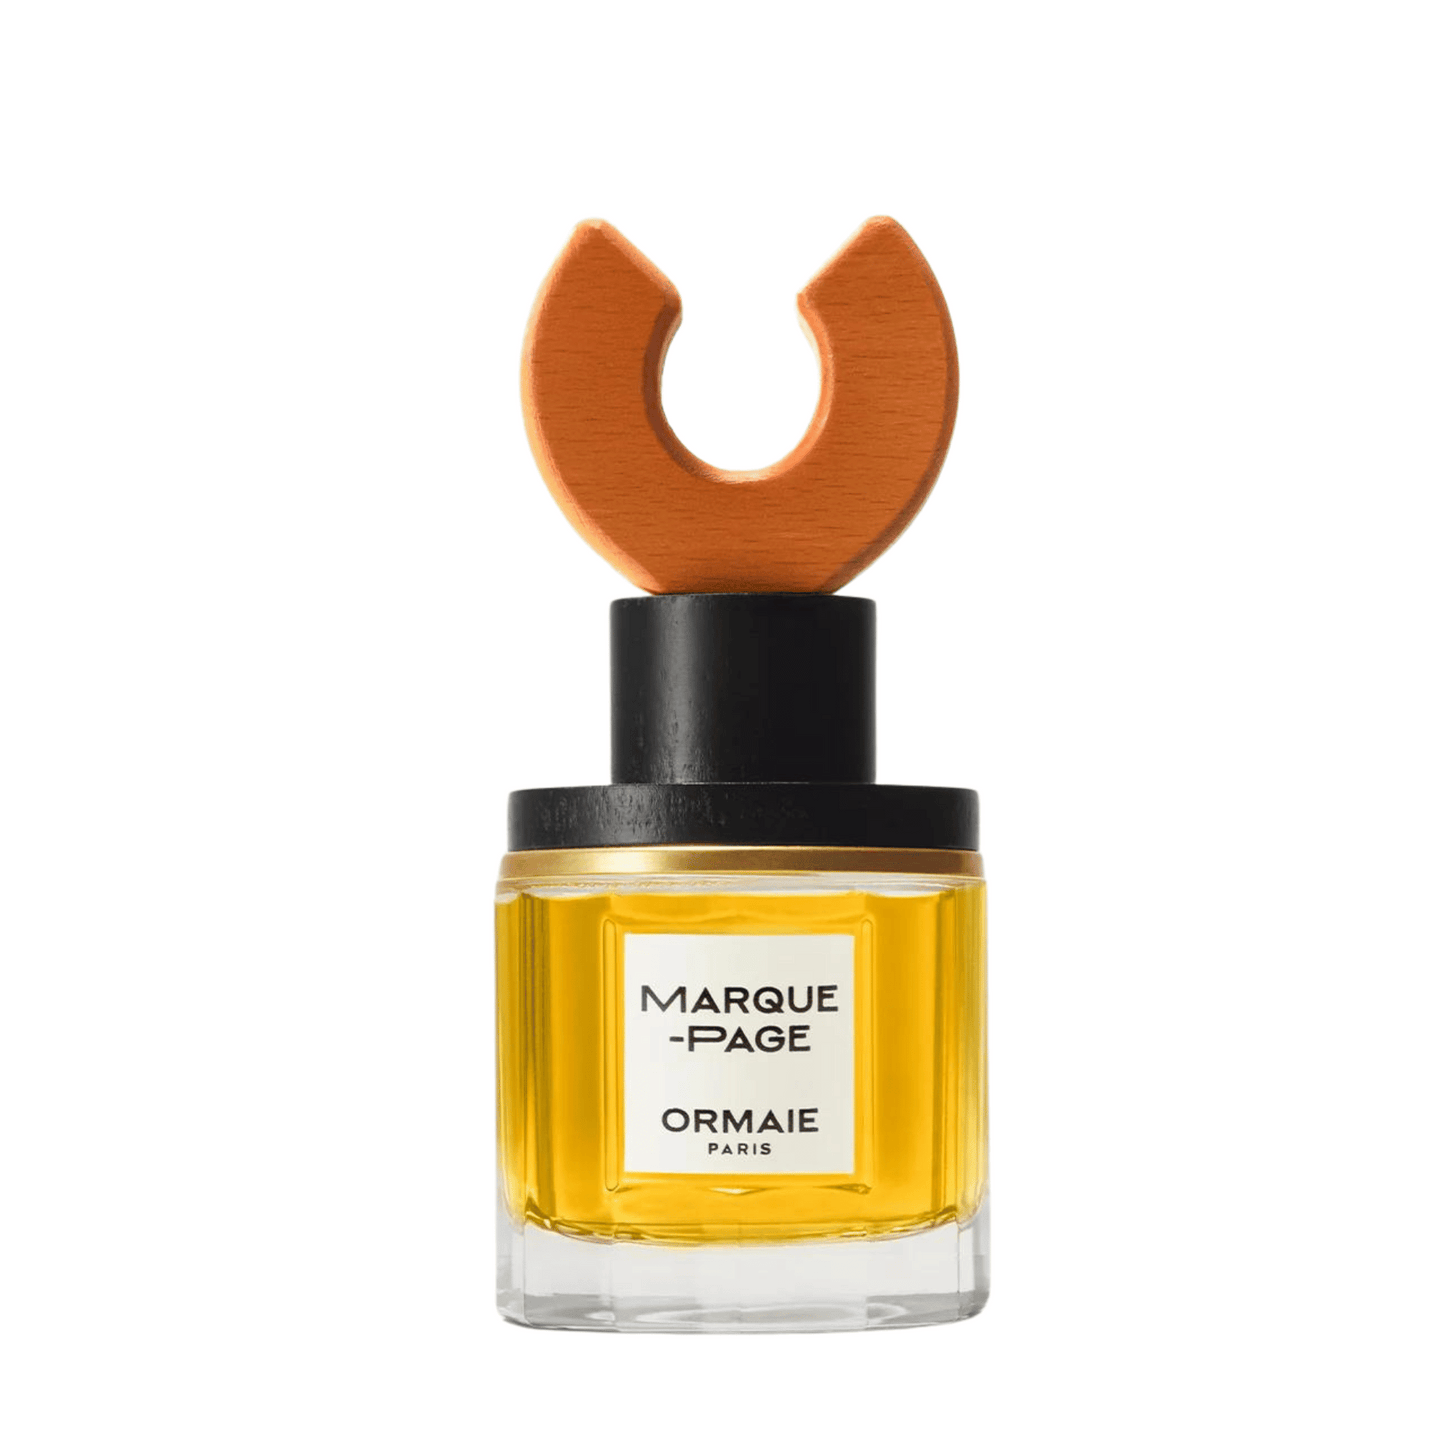 Primary Image of Marque-Page EDP (50 ml)